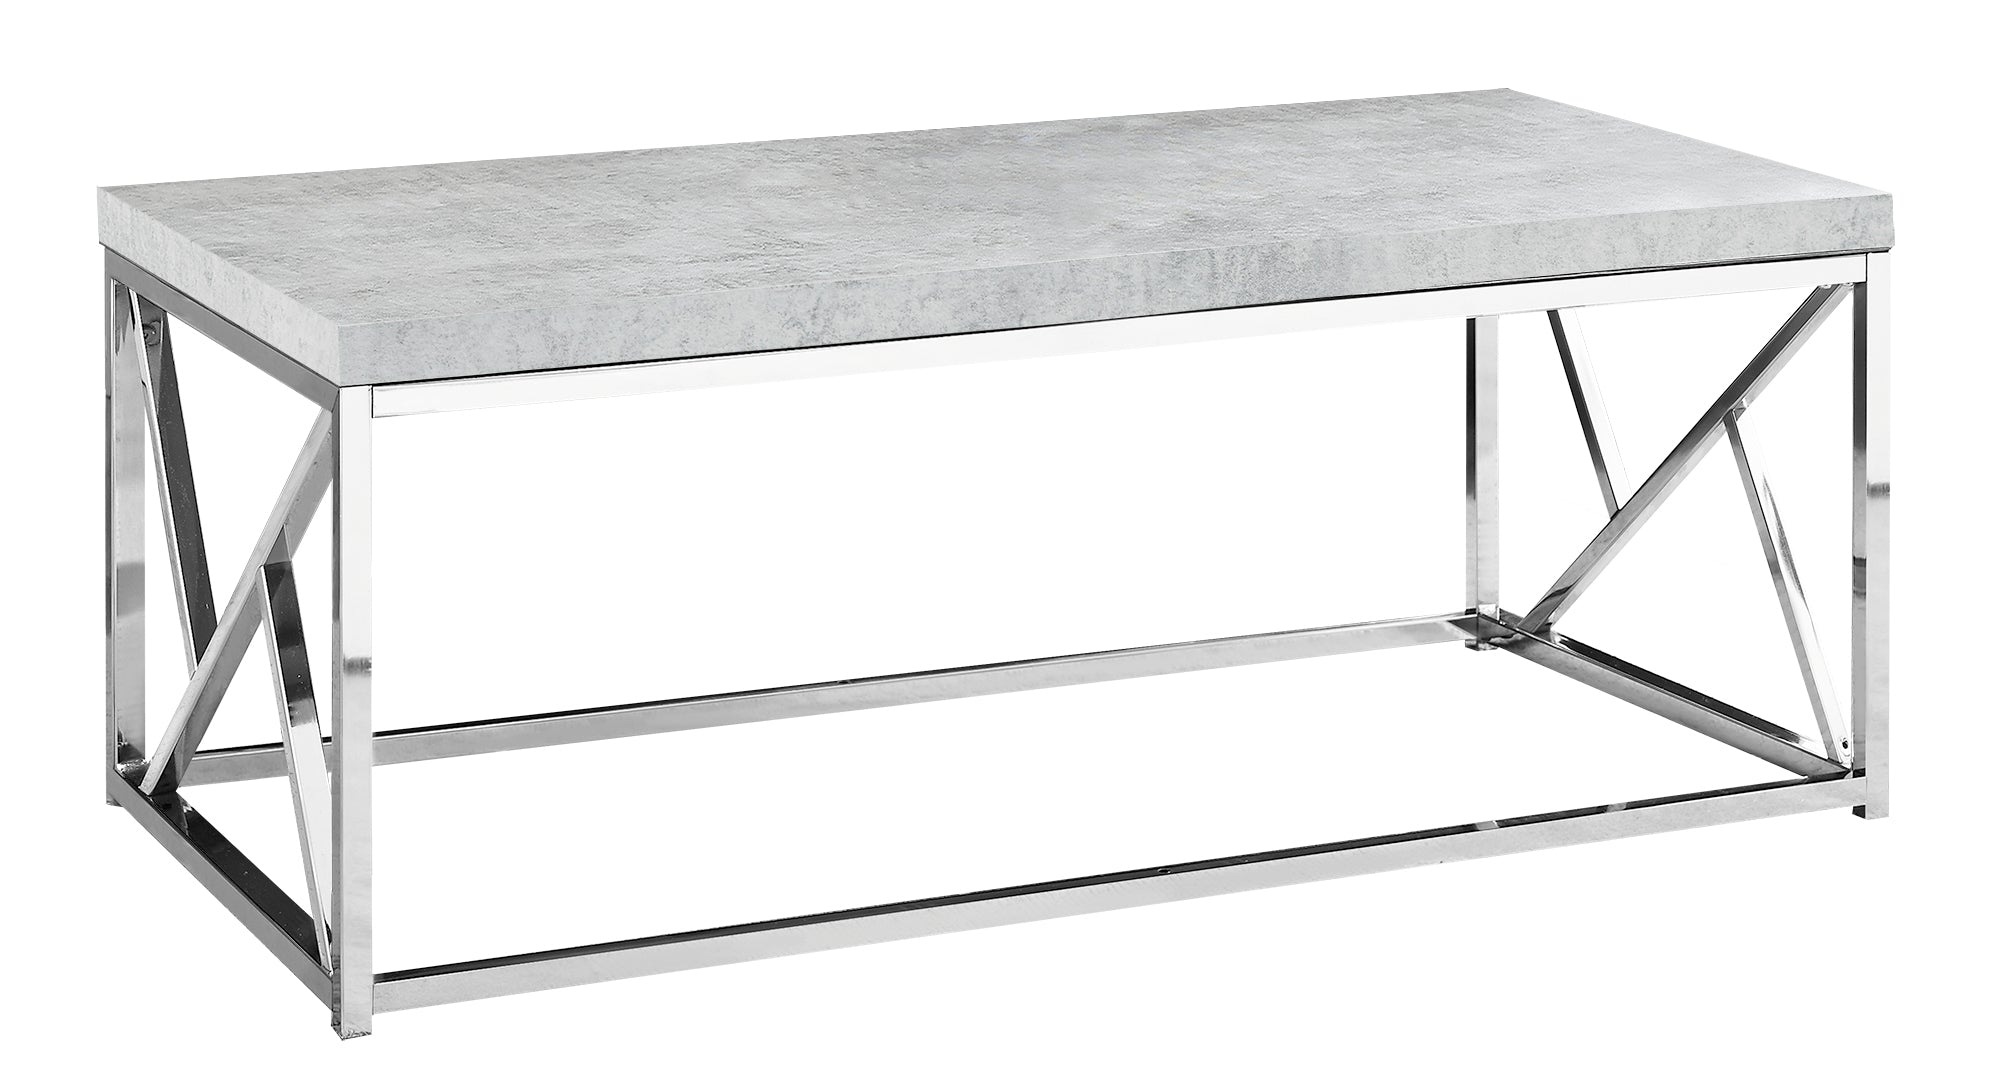 MN-383375    Coffee Table, Accent, Cocktail, Rectangular, Living Room, Metal Frame, Laminate, Grey Cement Look, Chrome, Contemporary, Modern